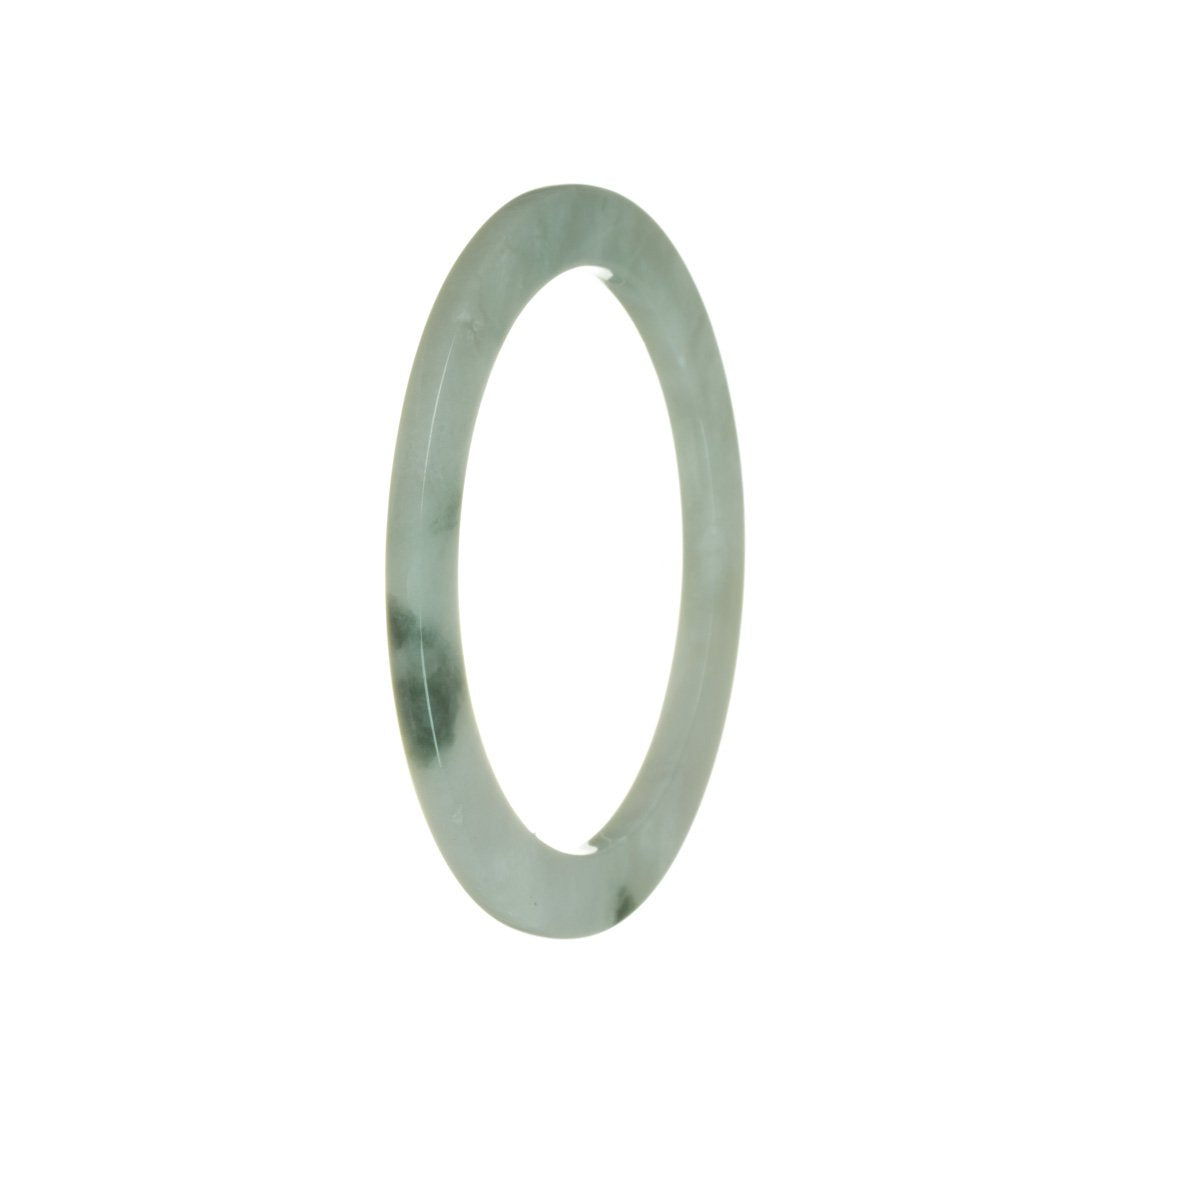 A thin, 55mm genuine Type A Flower Jade bangle bracelet from MAYS GEMS.